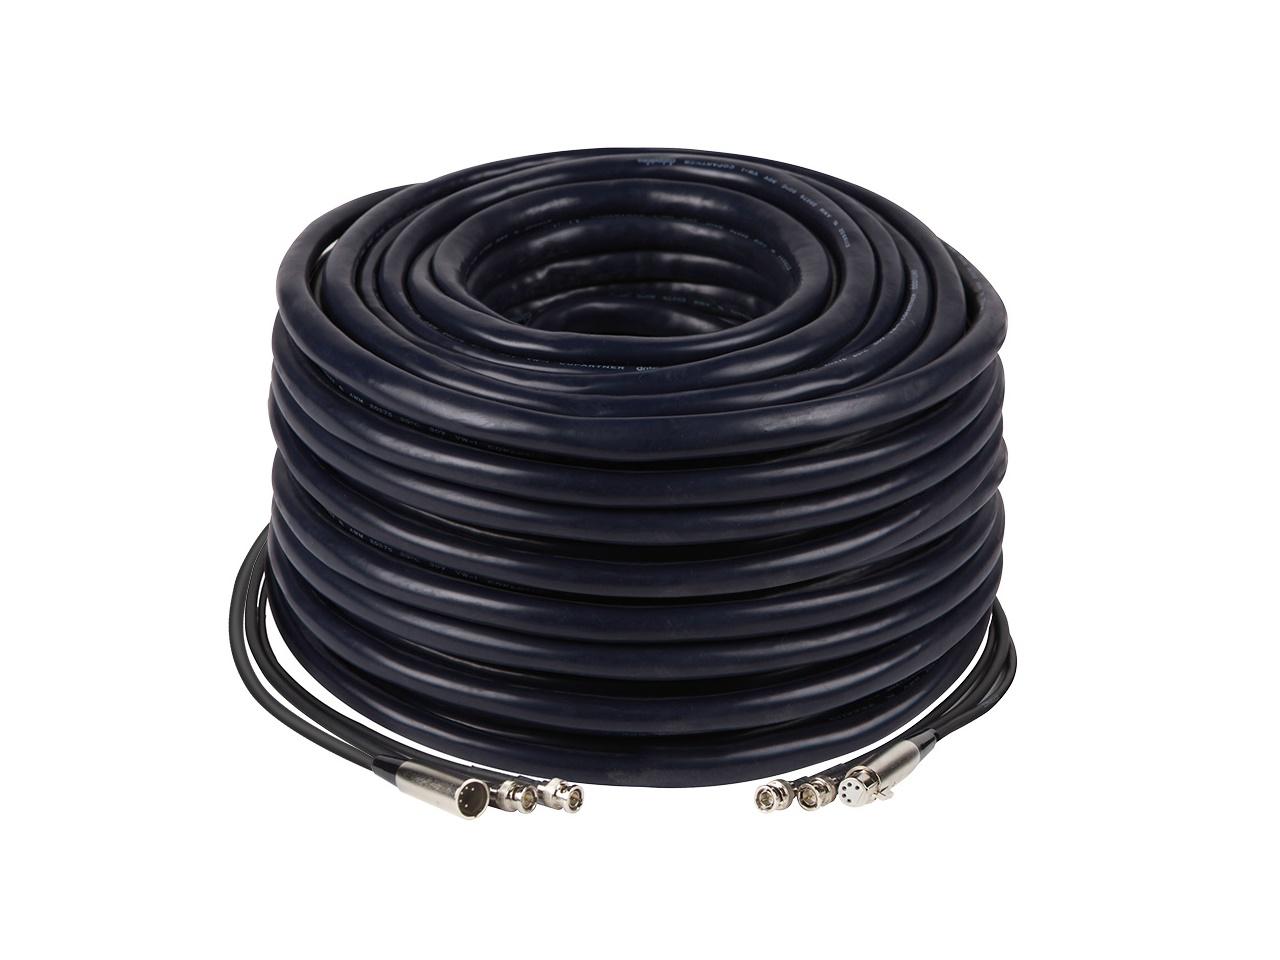 CB-24 100m All in One Cable for Use with SD-SDI and CVBS MVS Systems by Datavideo